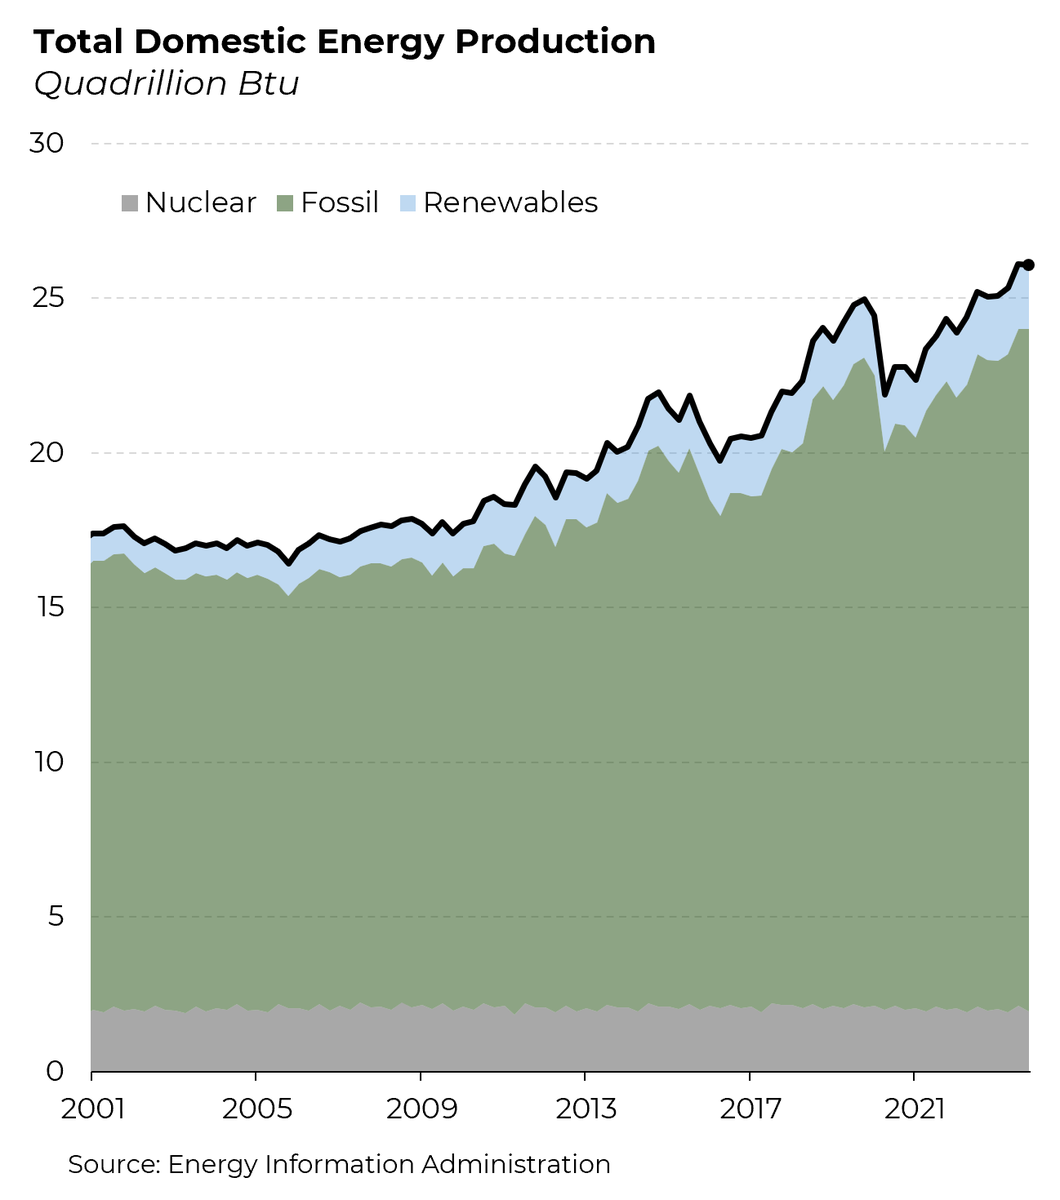 They repeat the same lies, over and over. Oil, gas, and renewable production are at all-time highs under Biden.